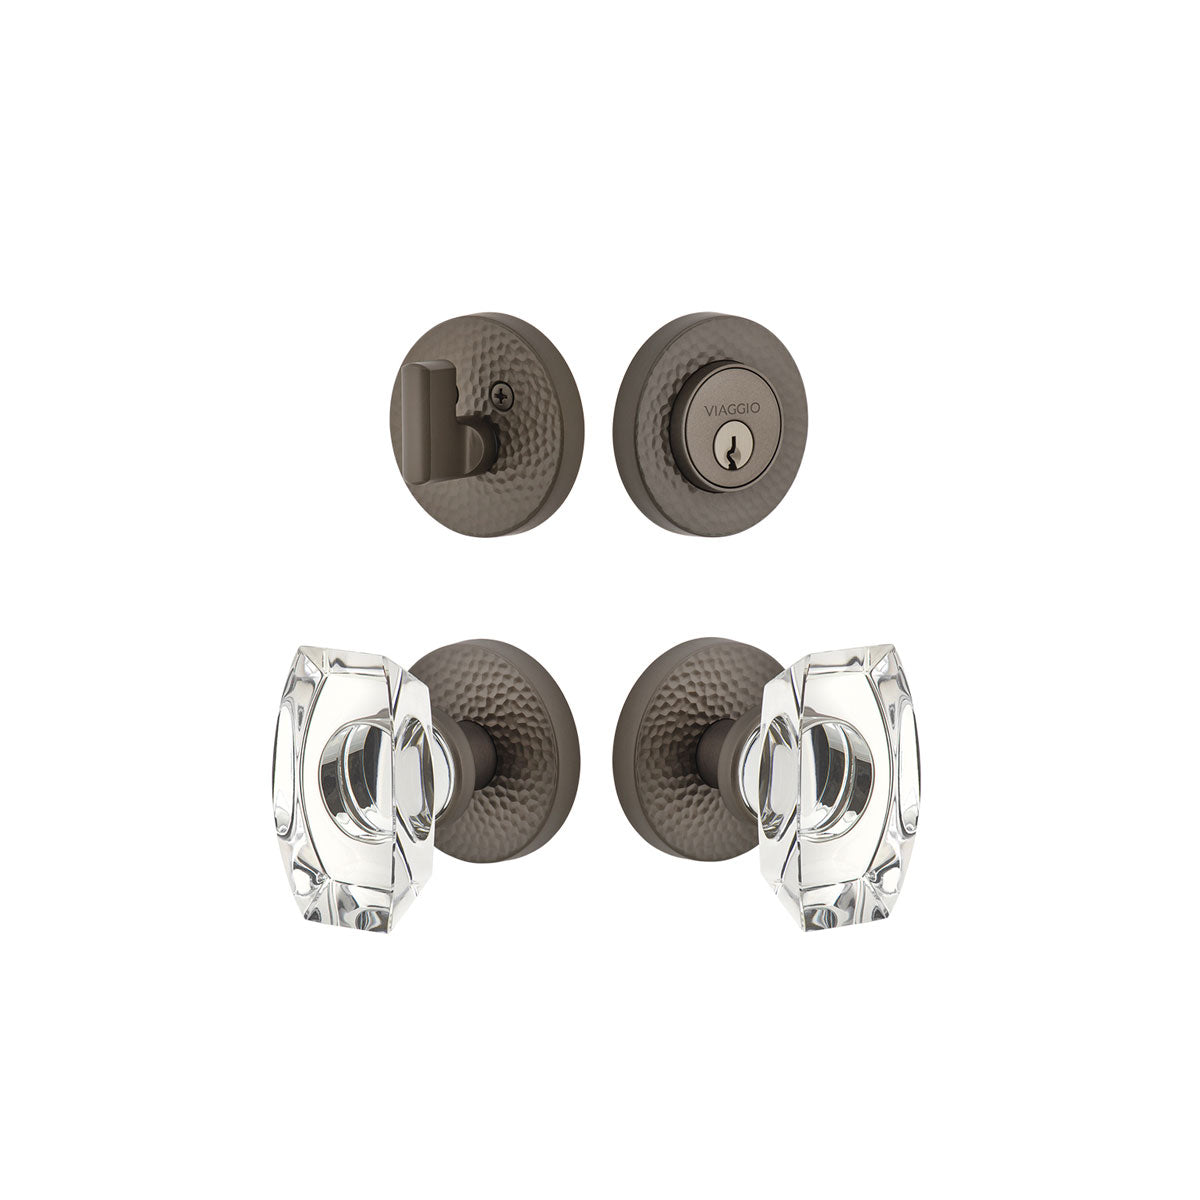 Circolo Hammered Rosette Entry Set with Stella Knob in Titanium Gray